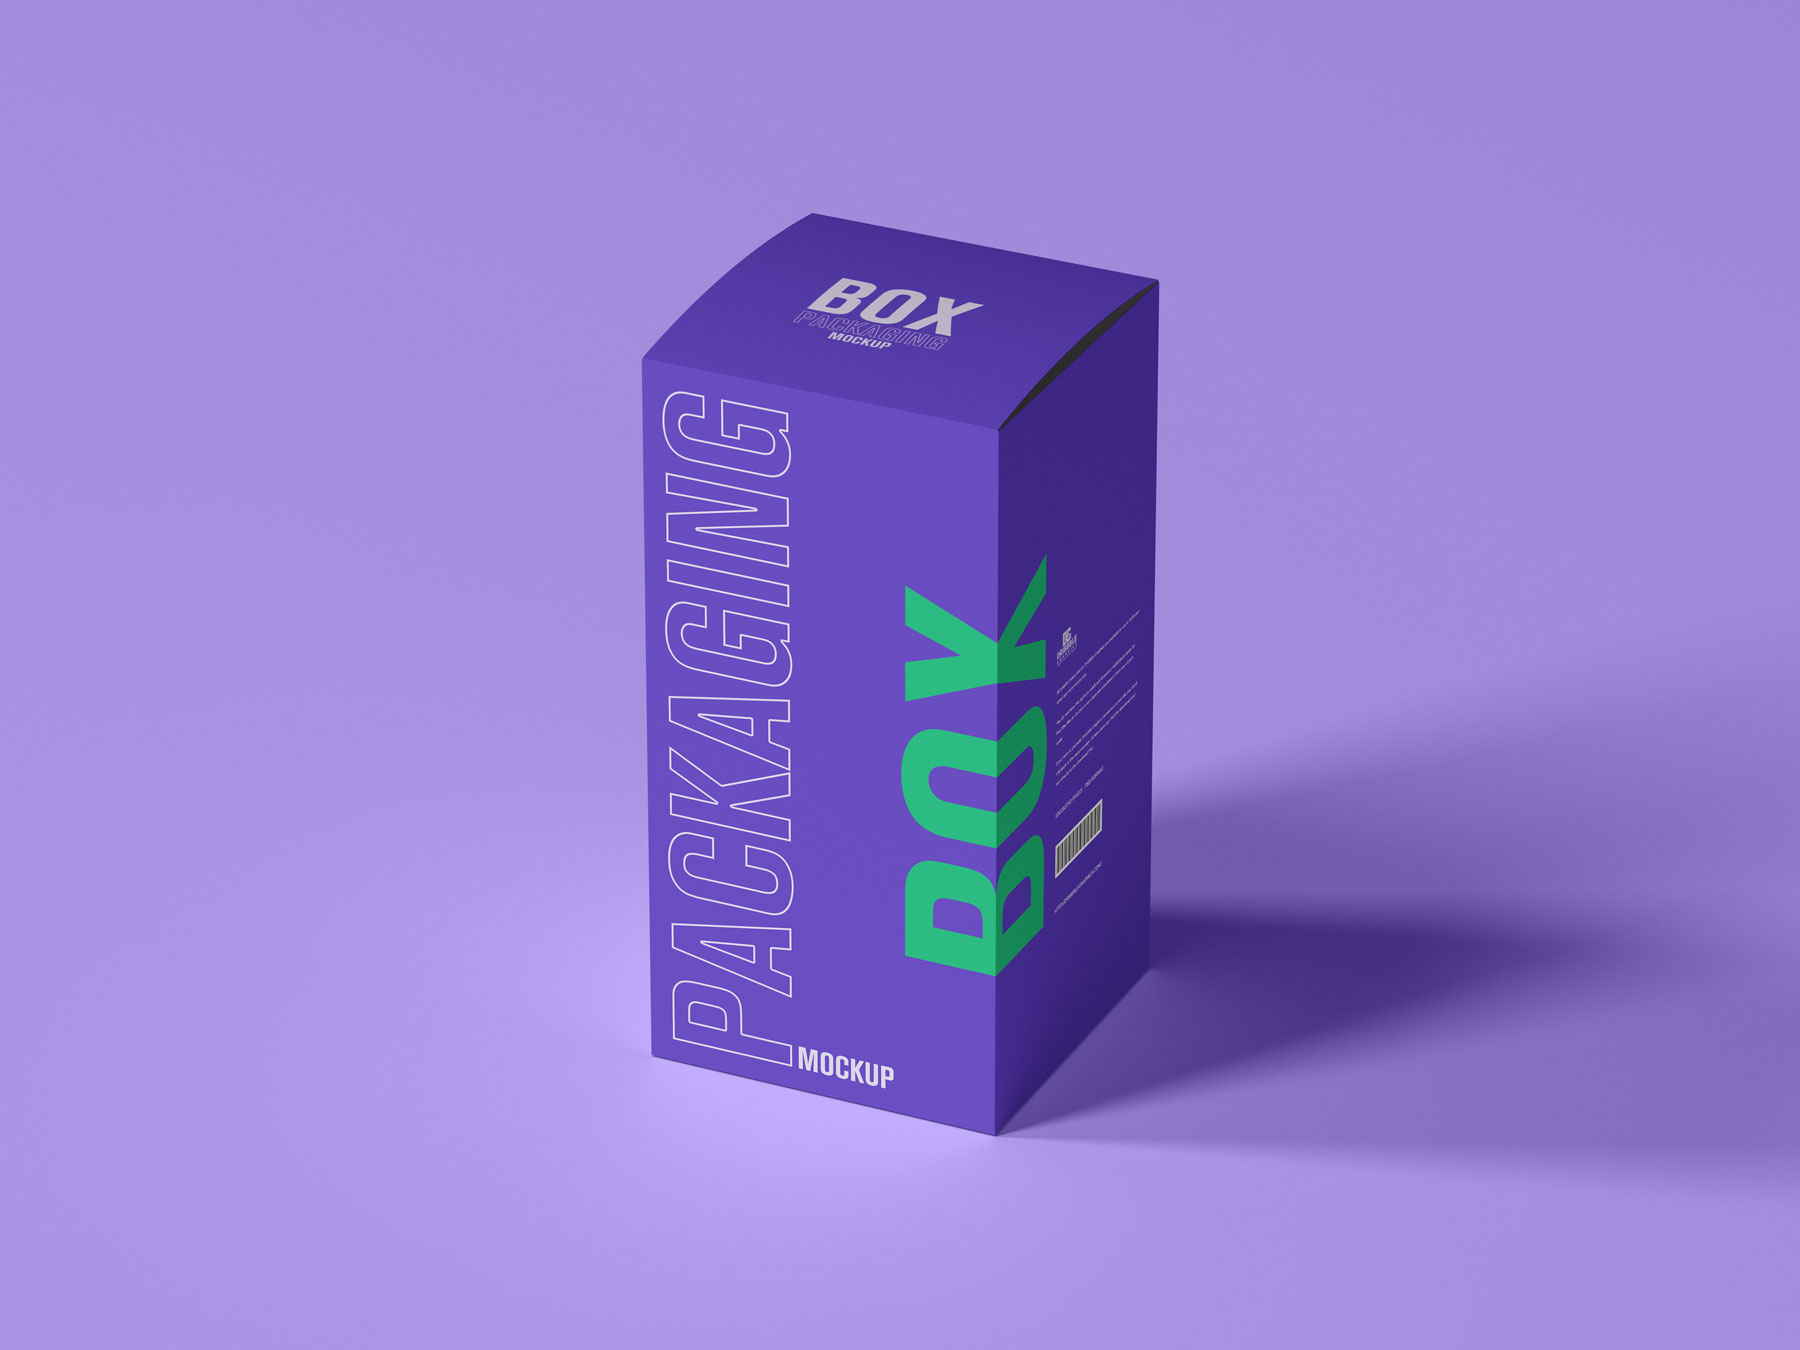 Free-Standing-Product-Box-Packaging-Mockup-Design